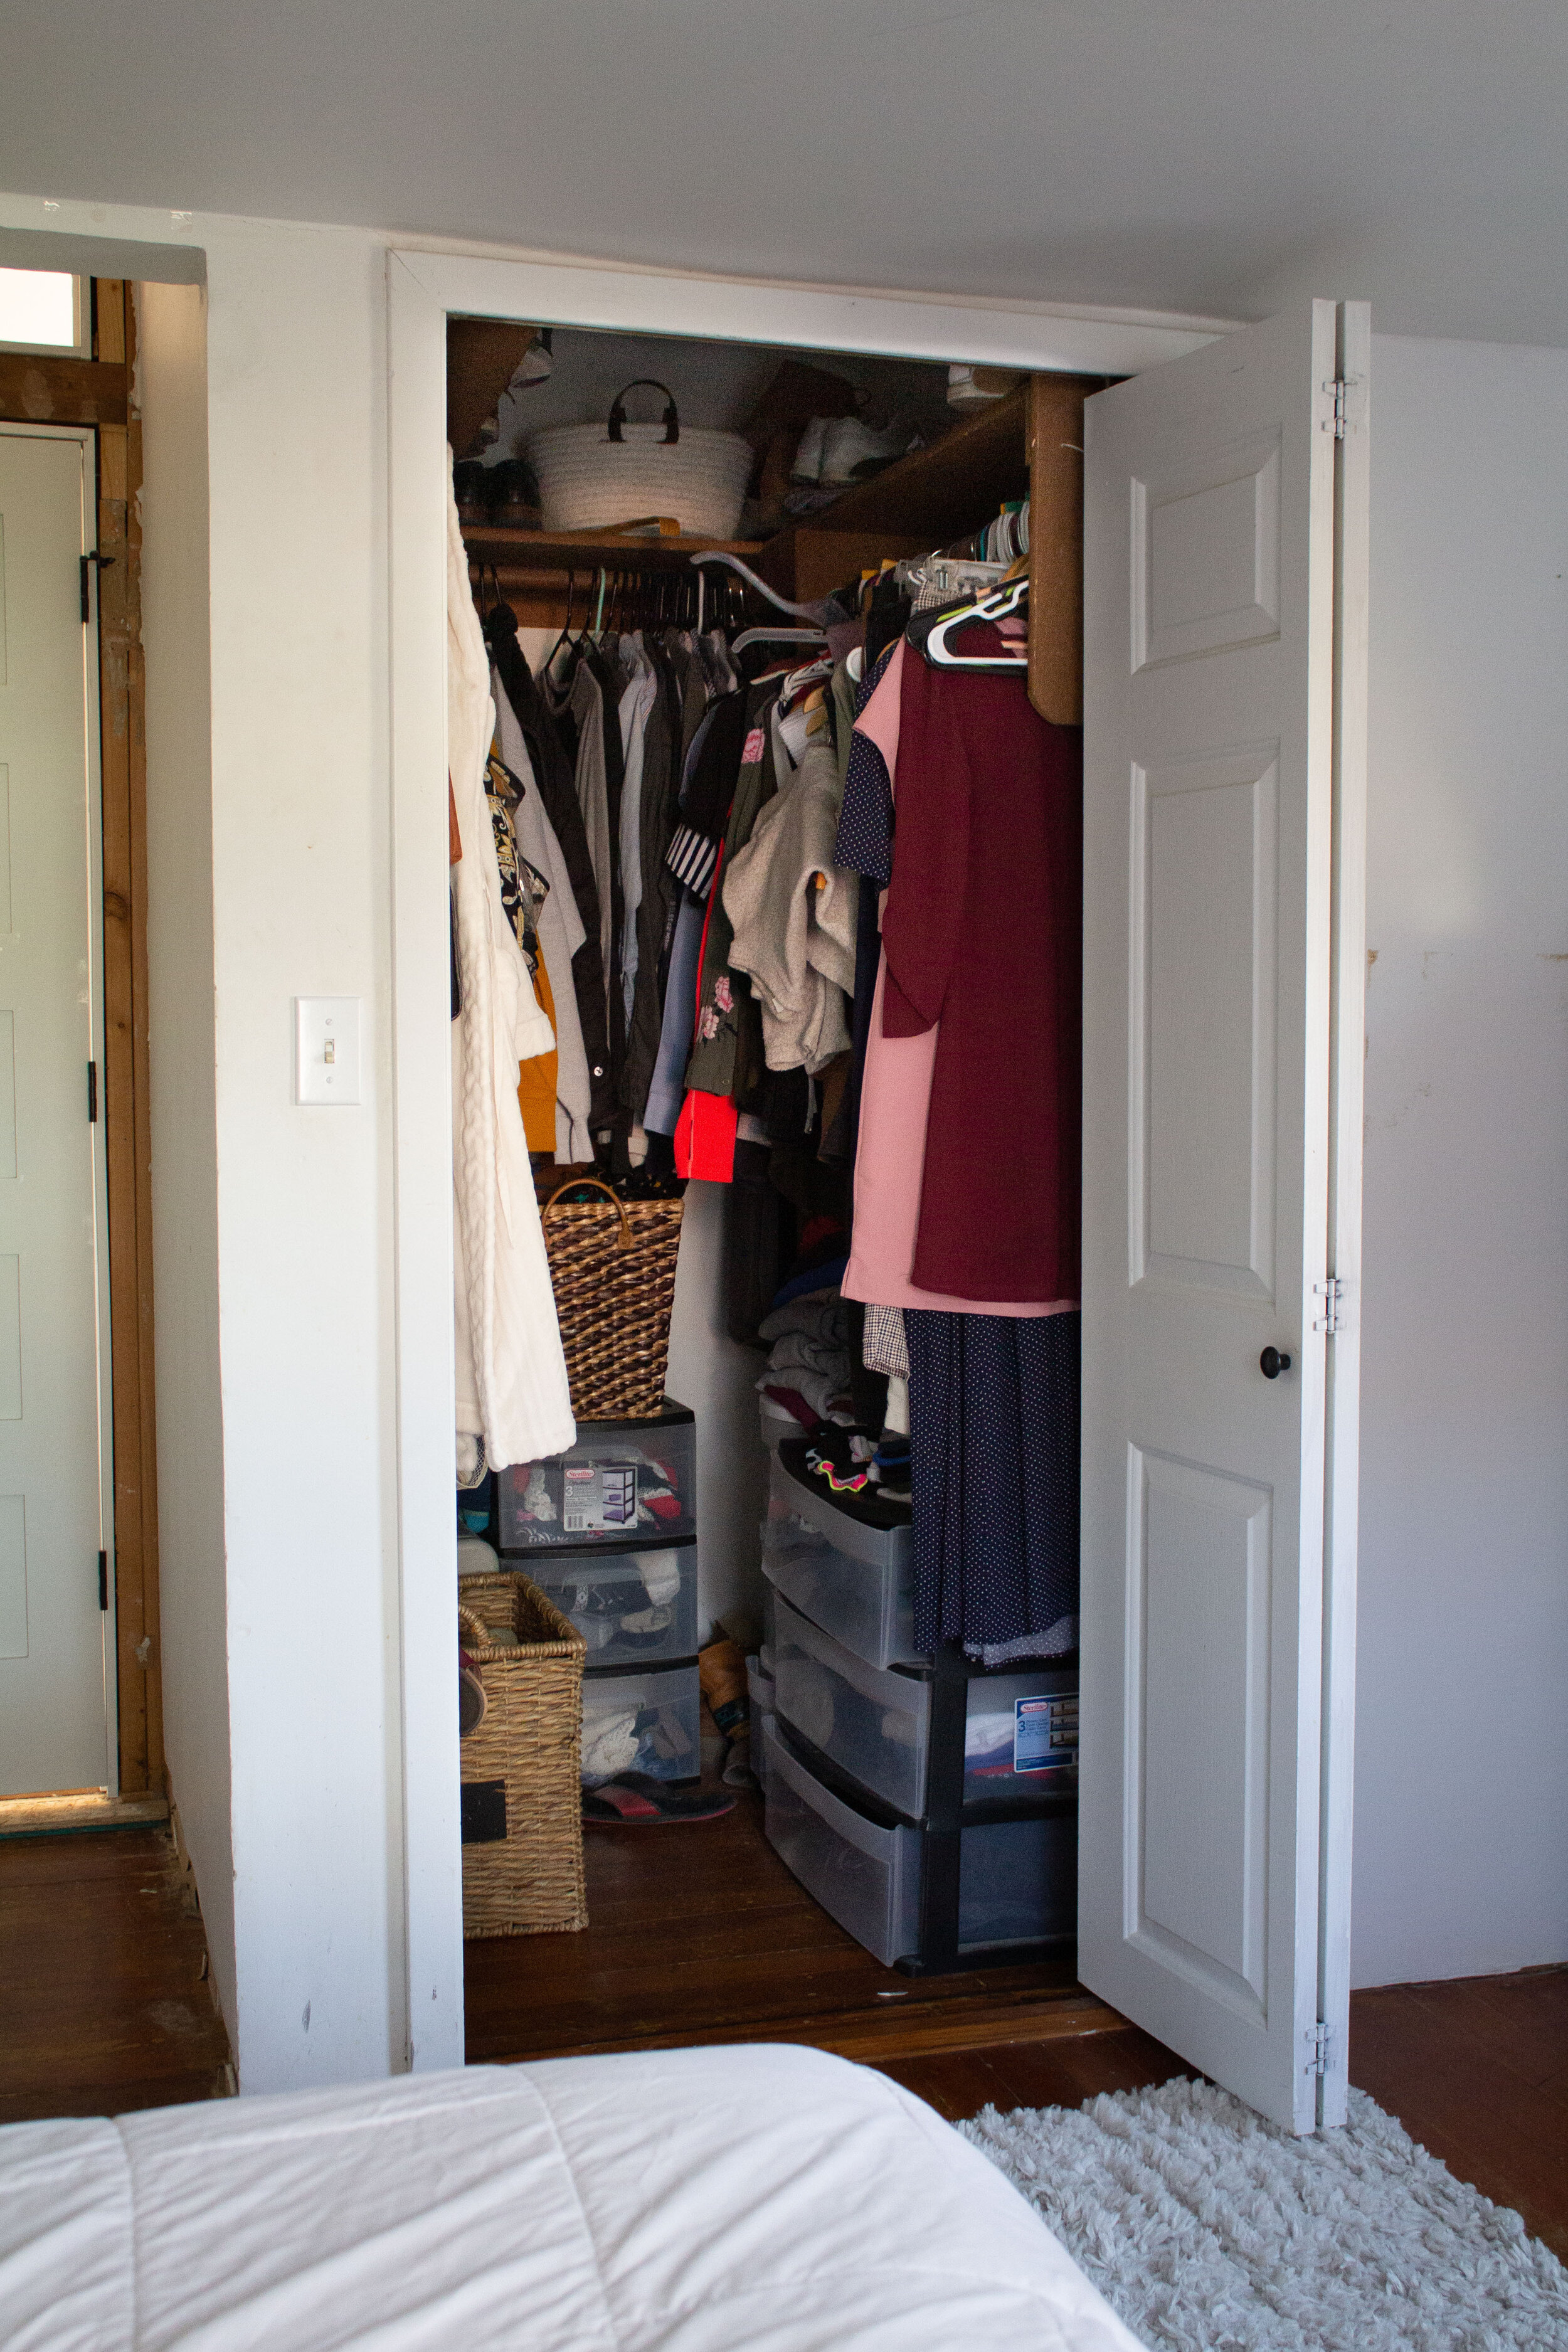 4 Day Closet Makeover - A quick organizational transformation by Nadine Stay. Walk in closet styling inspiration and DIY shelf organization. Closet Before and After Reveal!